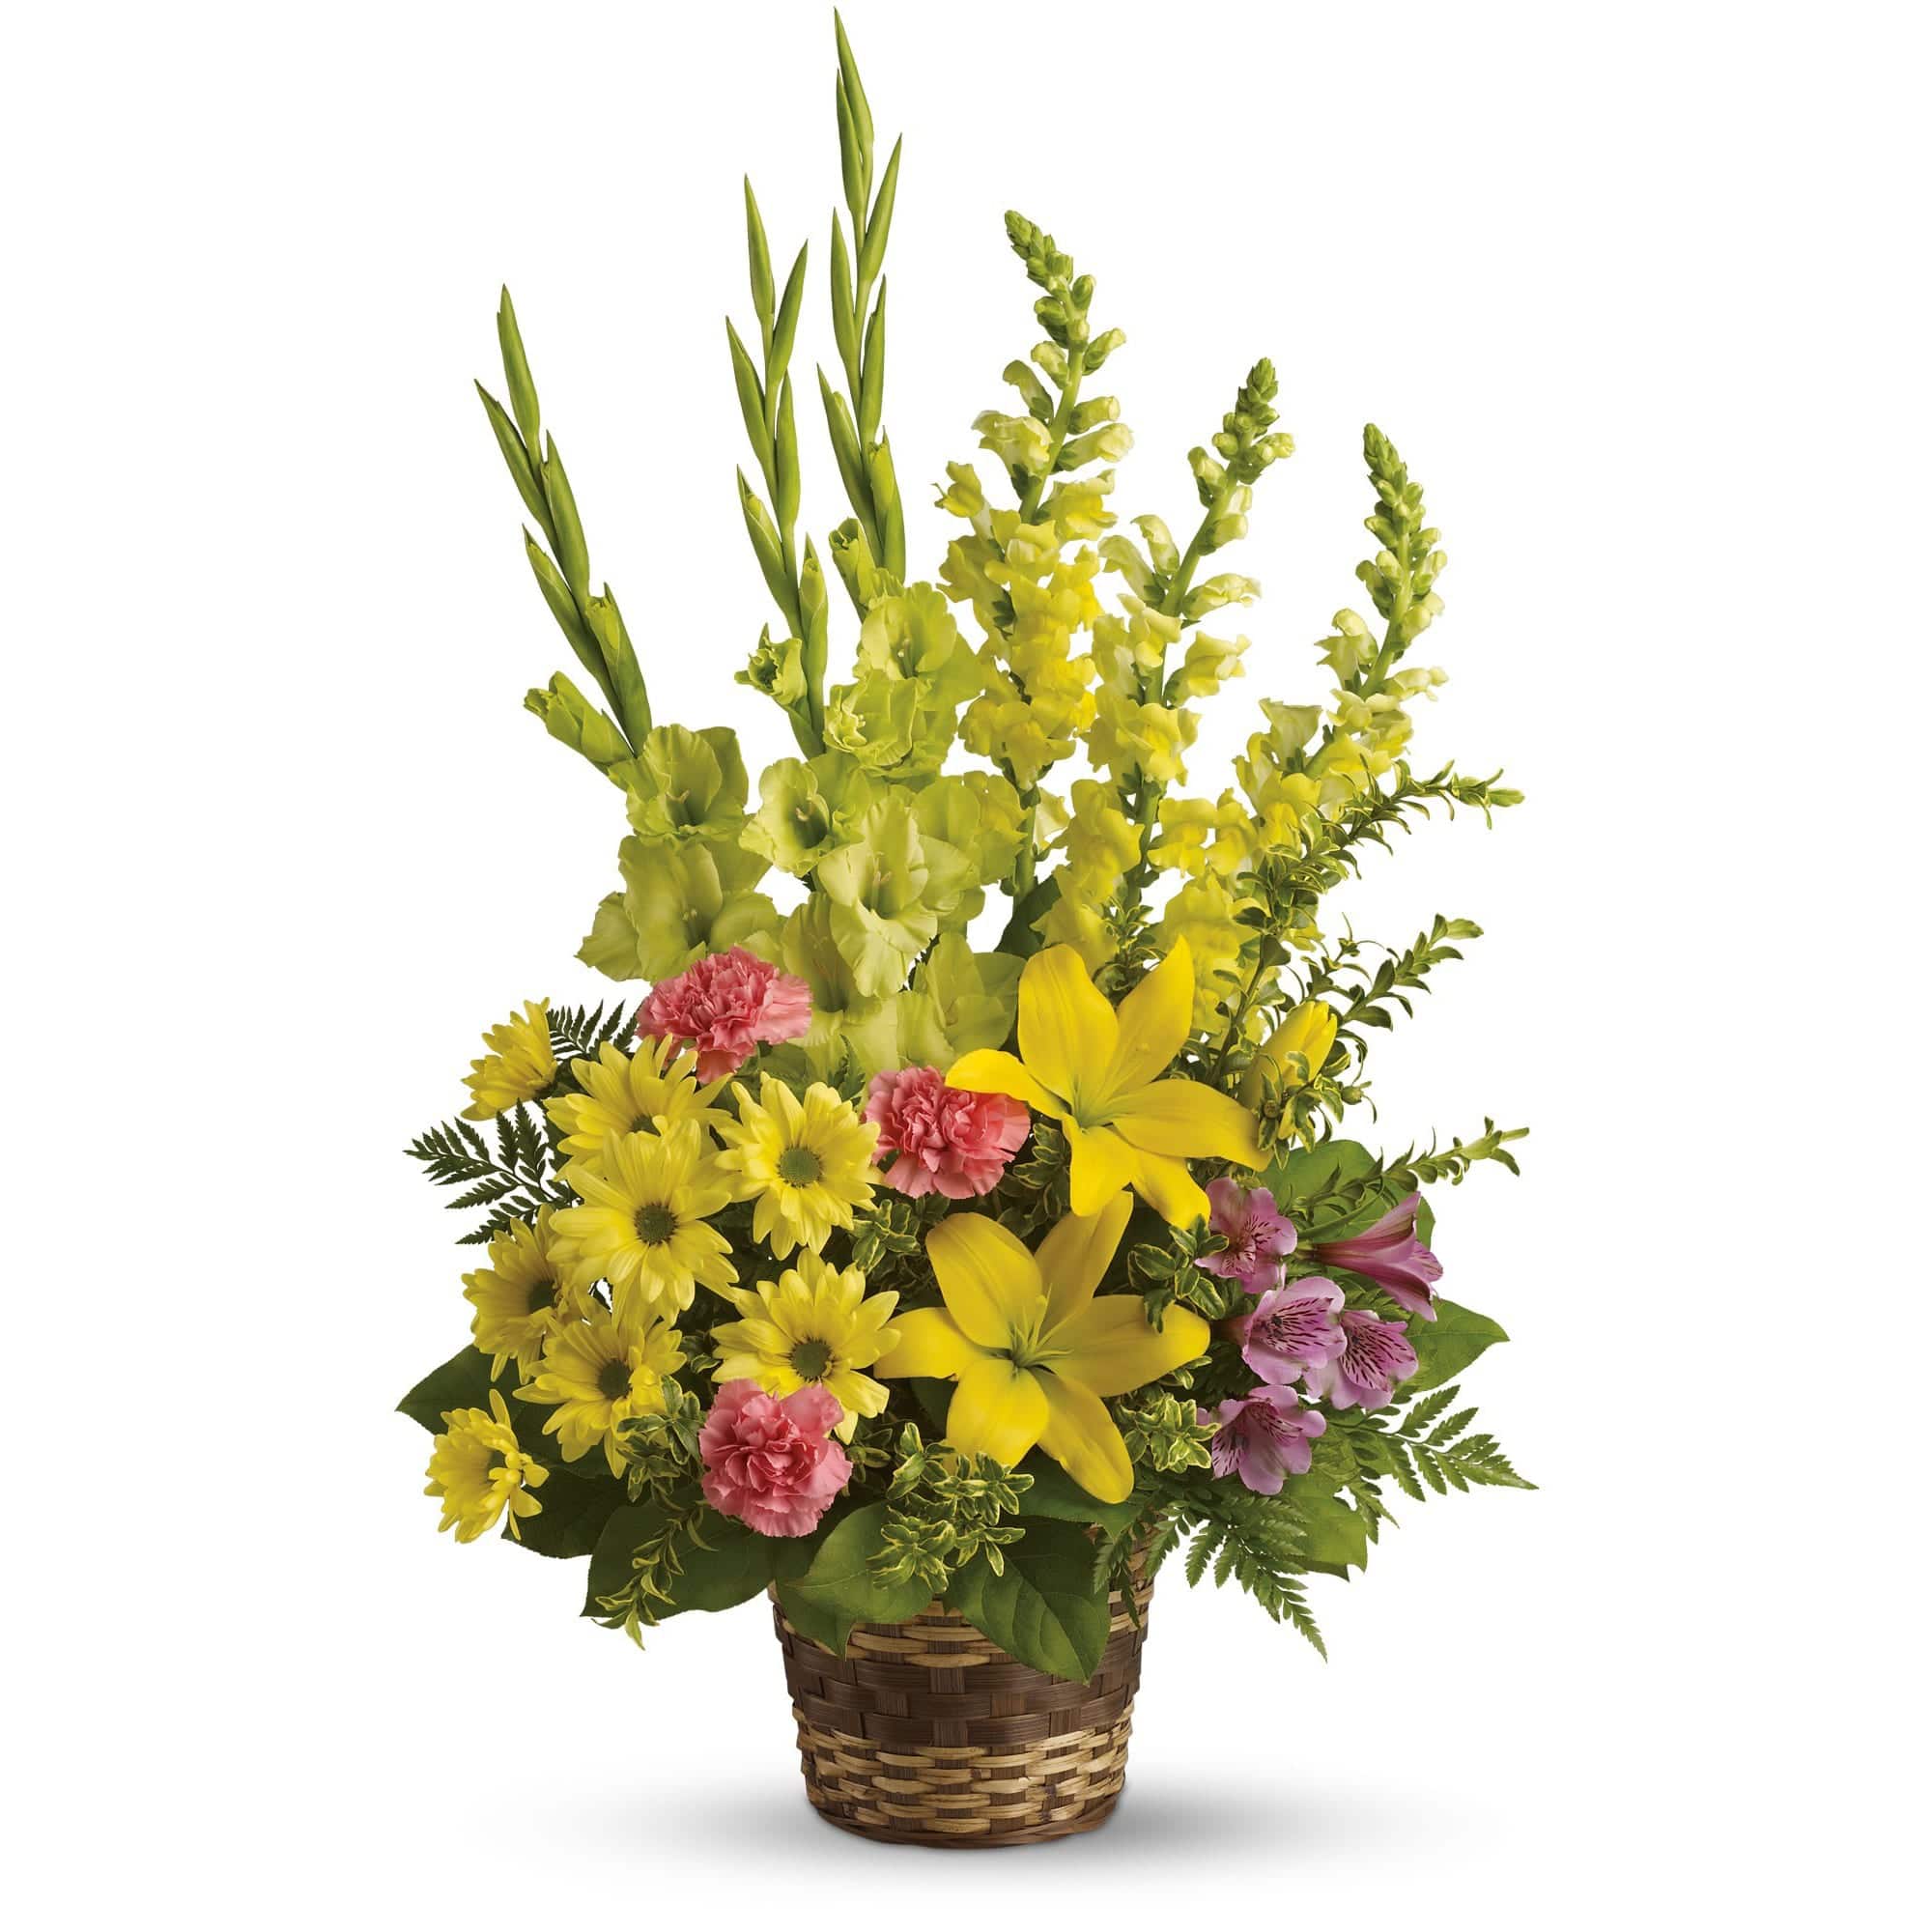 yellow asiatic lilies, yellow gladioli, yellow snapdragons, pink carnations